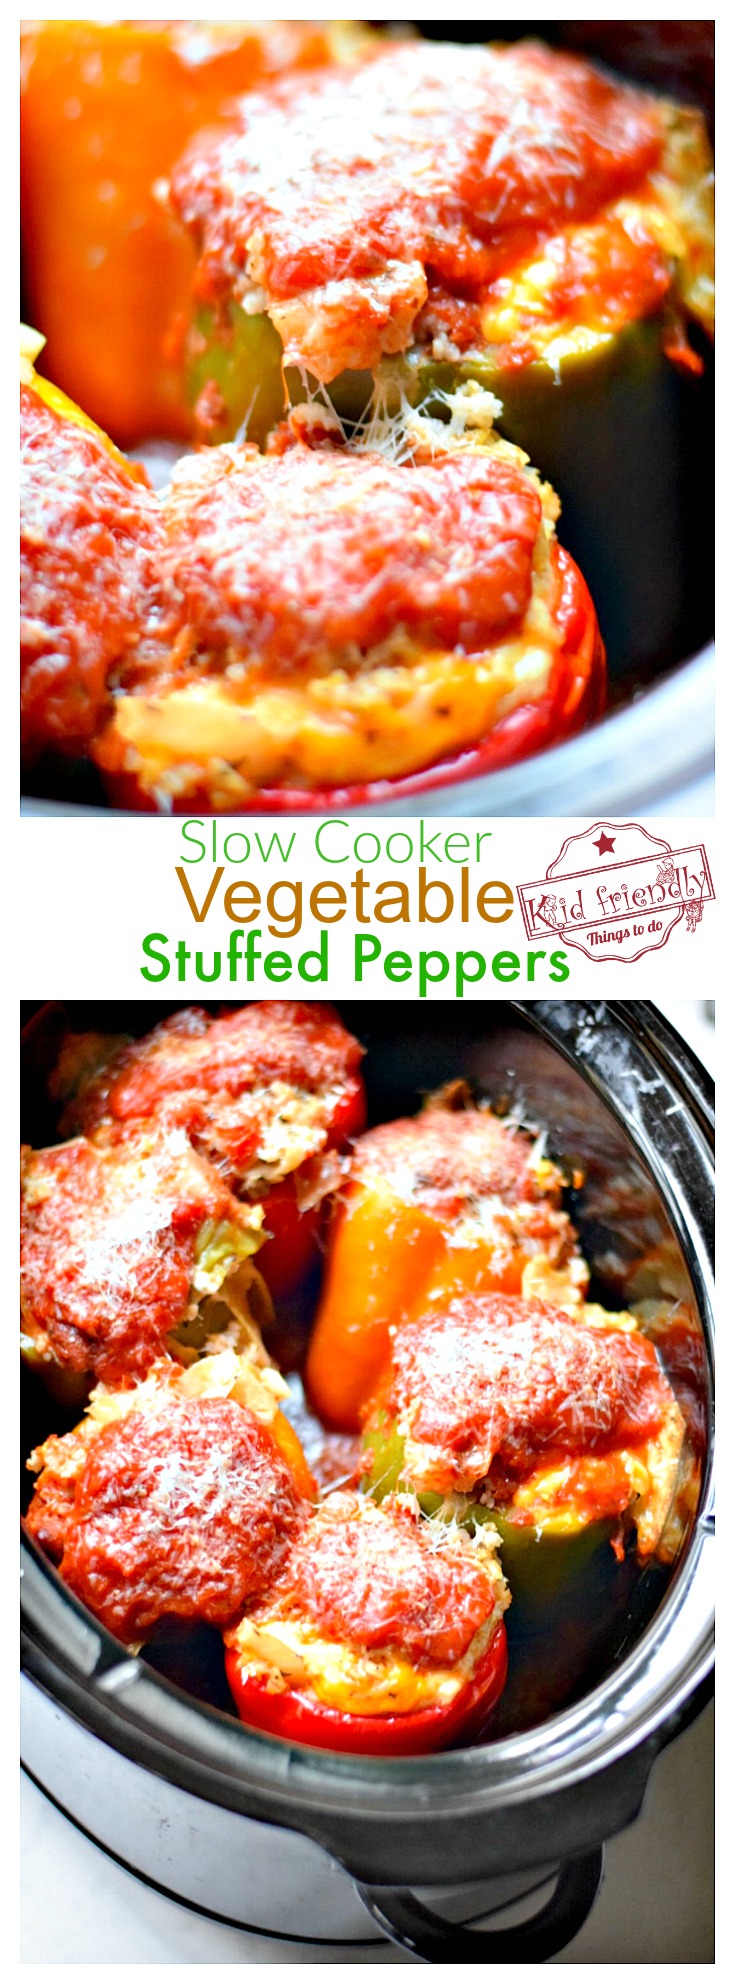 The BEST Healthy Slow Cooker Vegetable Stuffed Peppers Made with rice and beans. Perfect for a family dinner. www.kidfriendlythingstodo.com